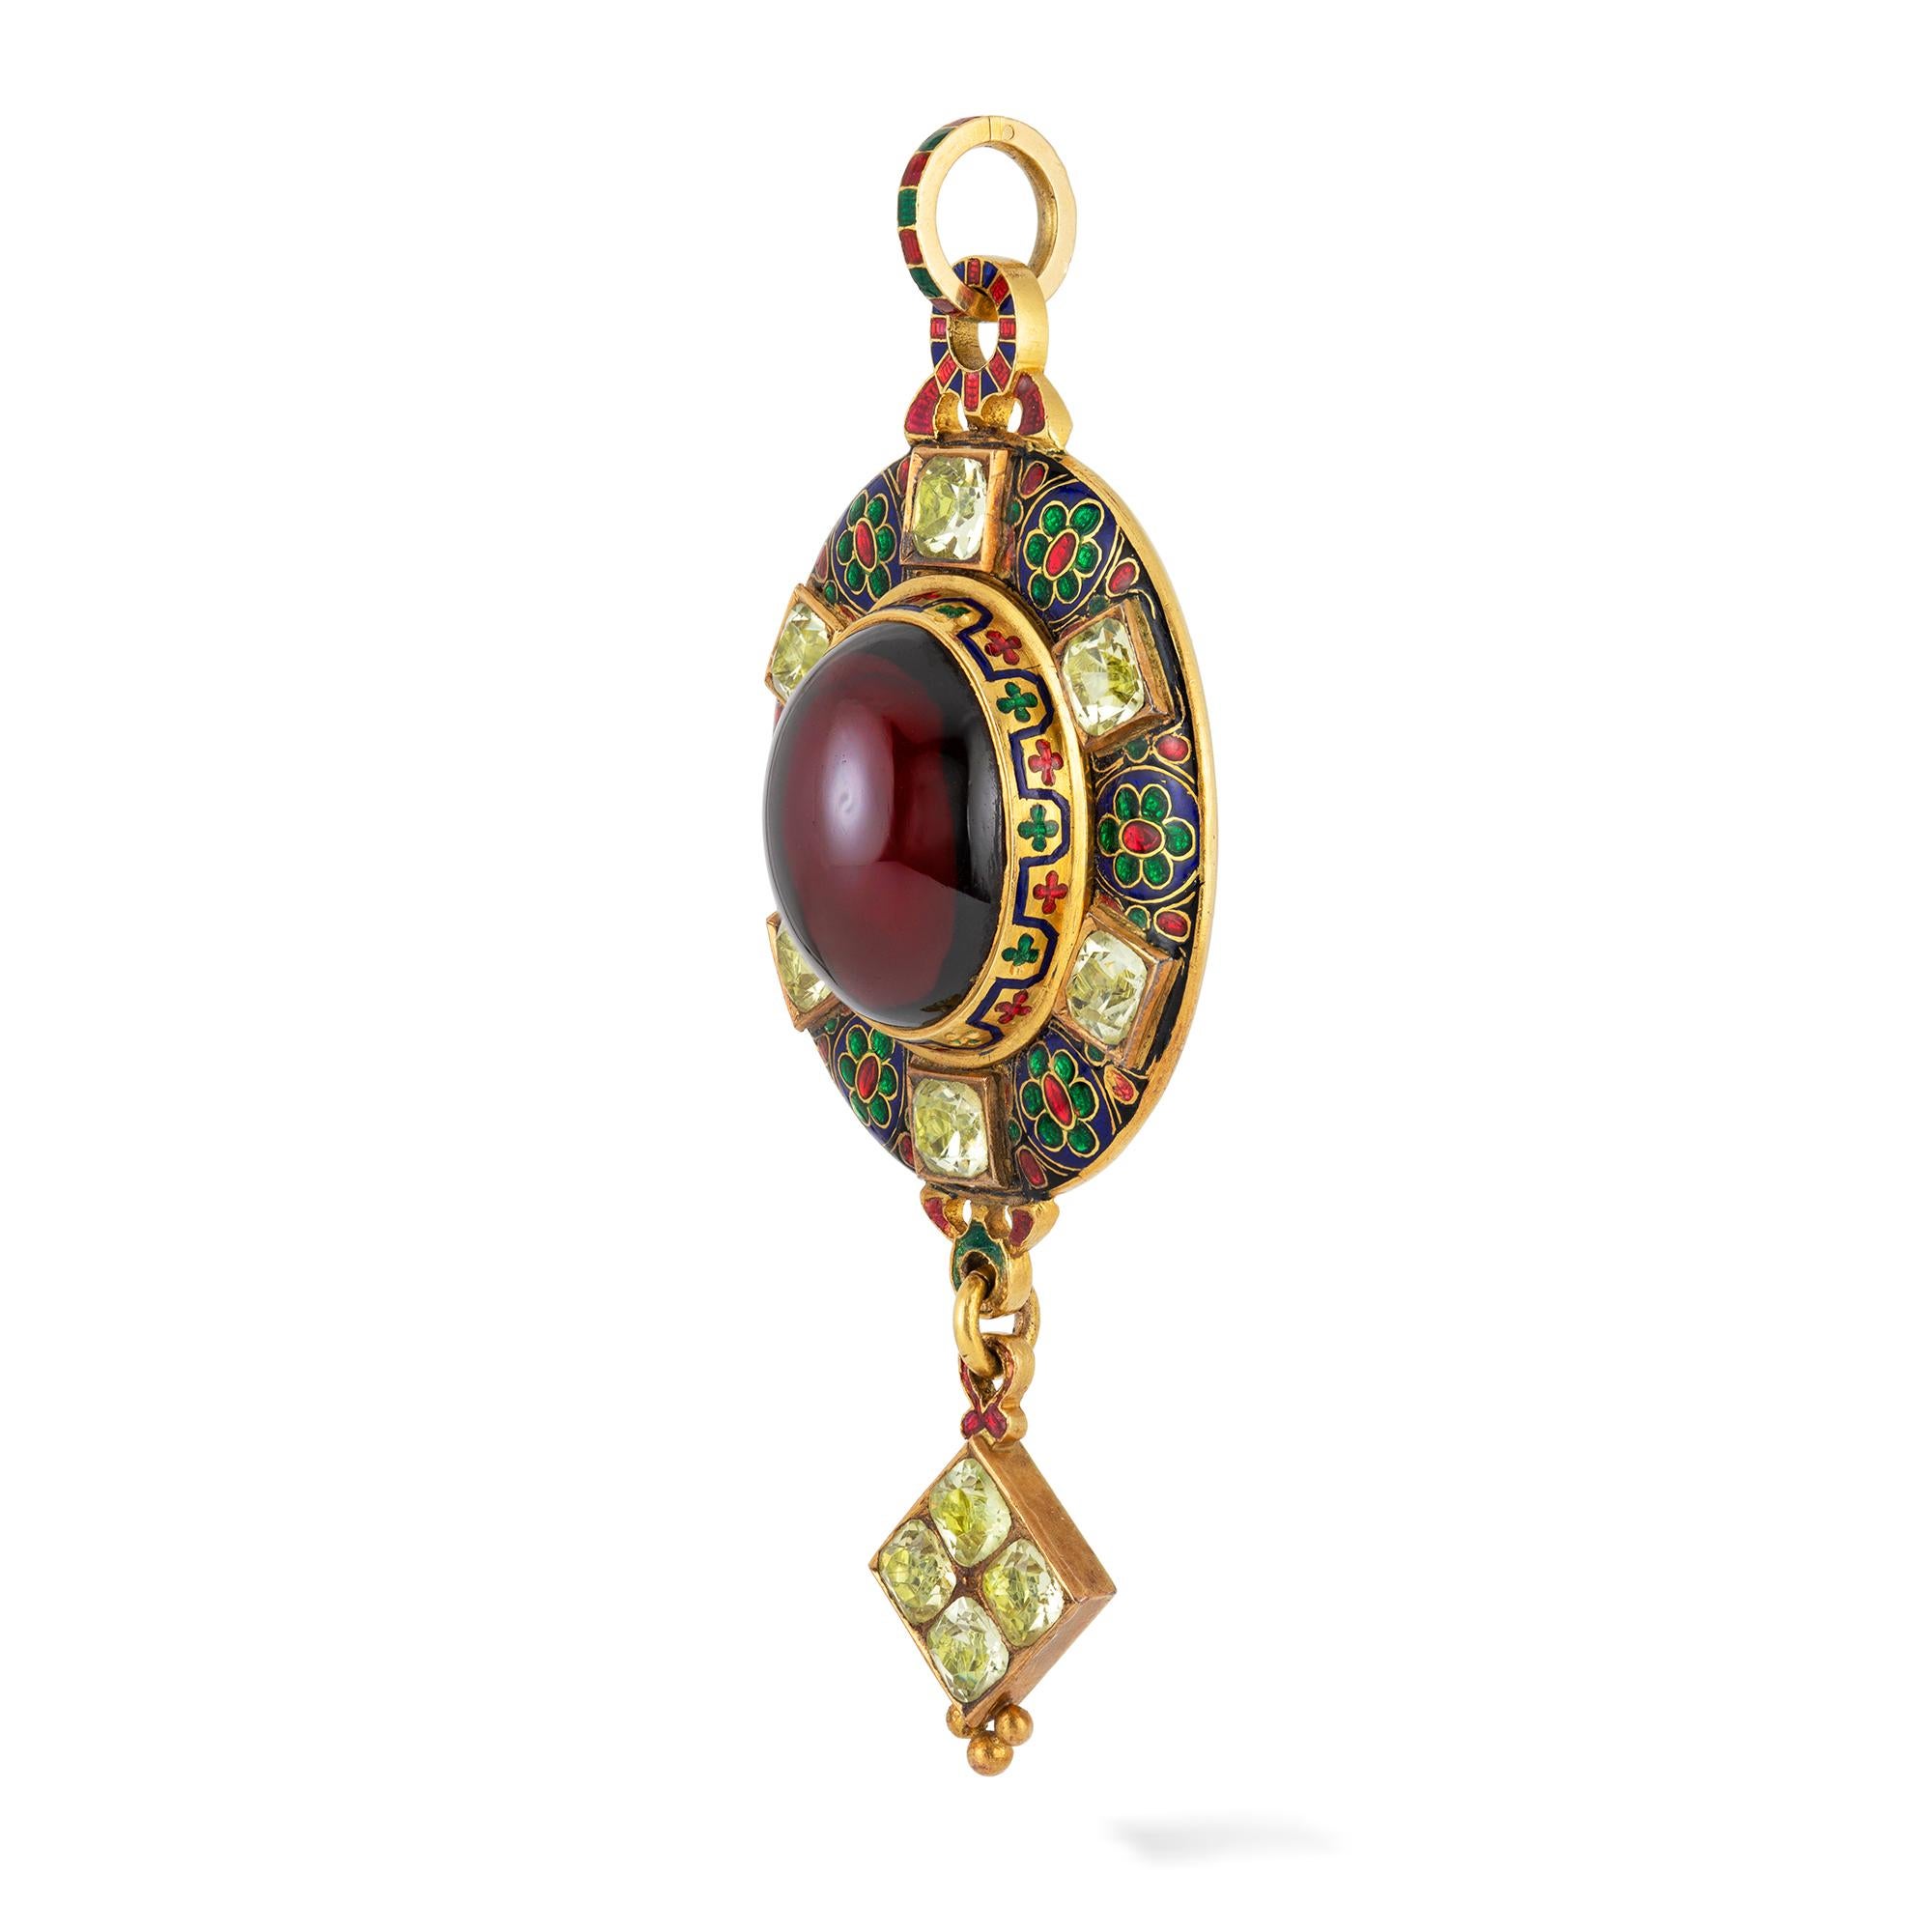 A Victorian Holbeinesque garnet and chrysoberyl pendant, to the centre an oval cabochon garnet measuring 18 x 14mm, surrounded by polychrome champlevé enamel frame, encrusted with six square-cut chrysoberyls, suspending a chrysoberyl-set drop, all